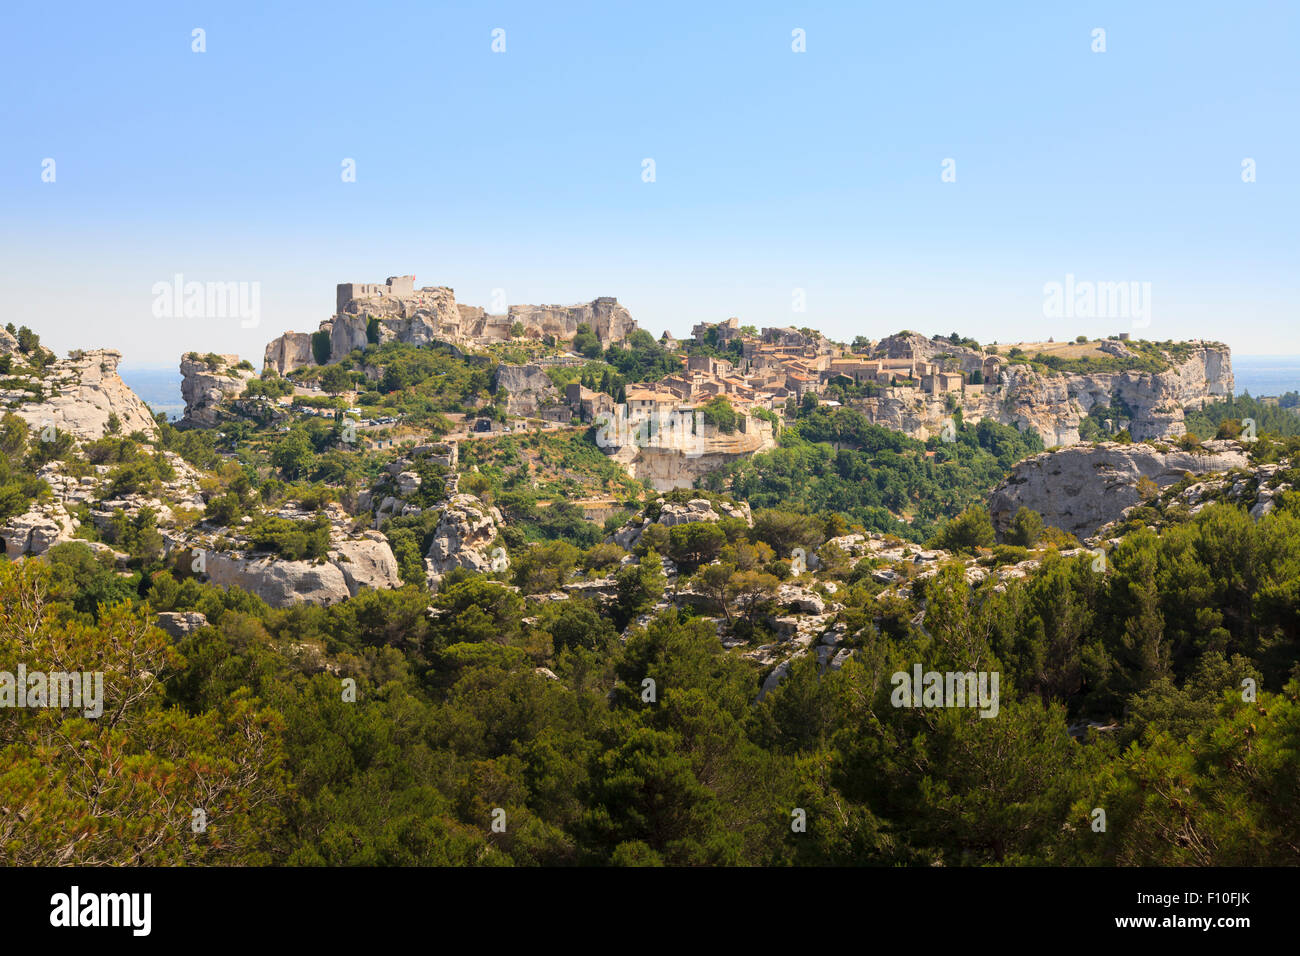 View of the cliff top town and ruined castle of Les Baux-de-Provence in France Stock Photo